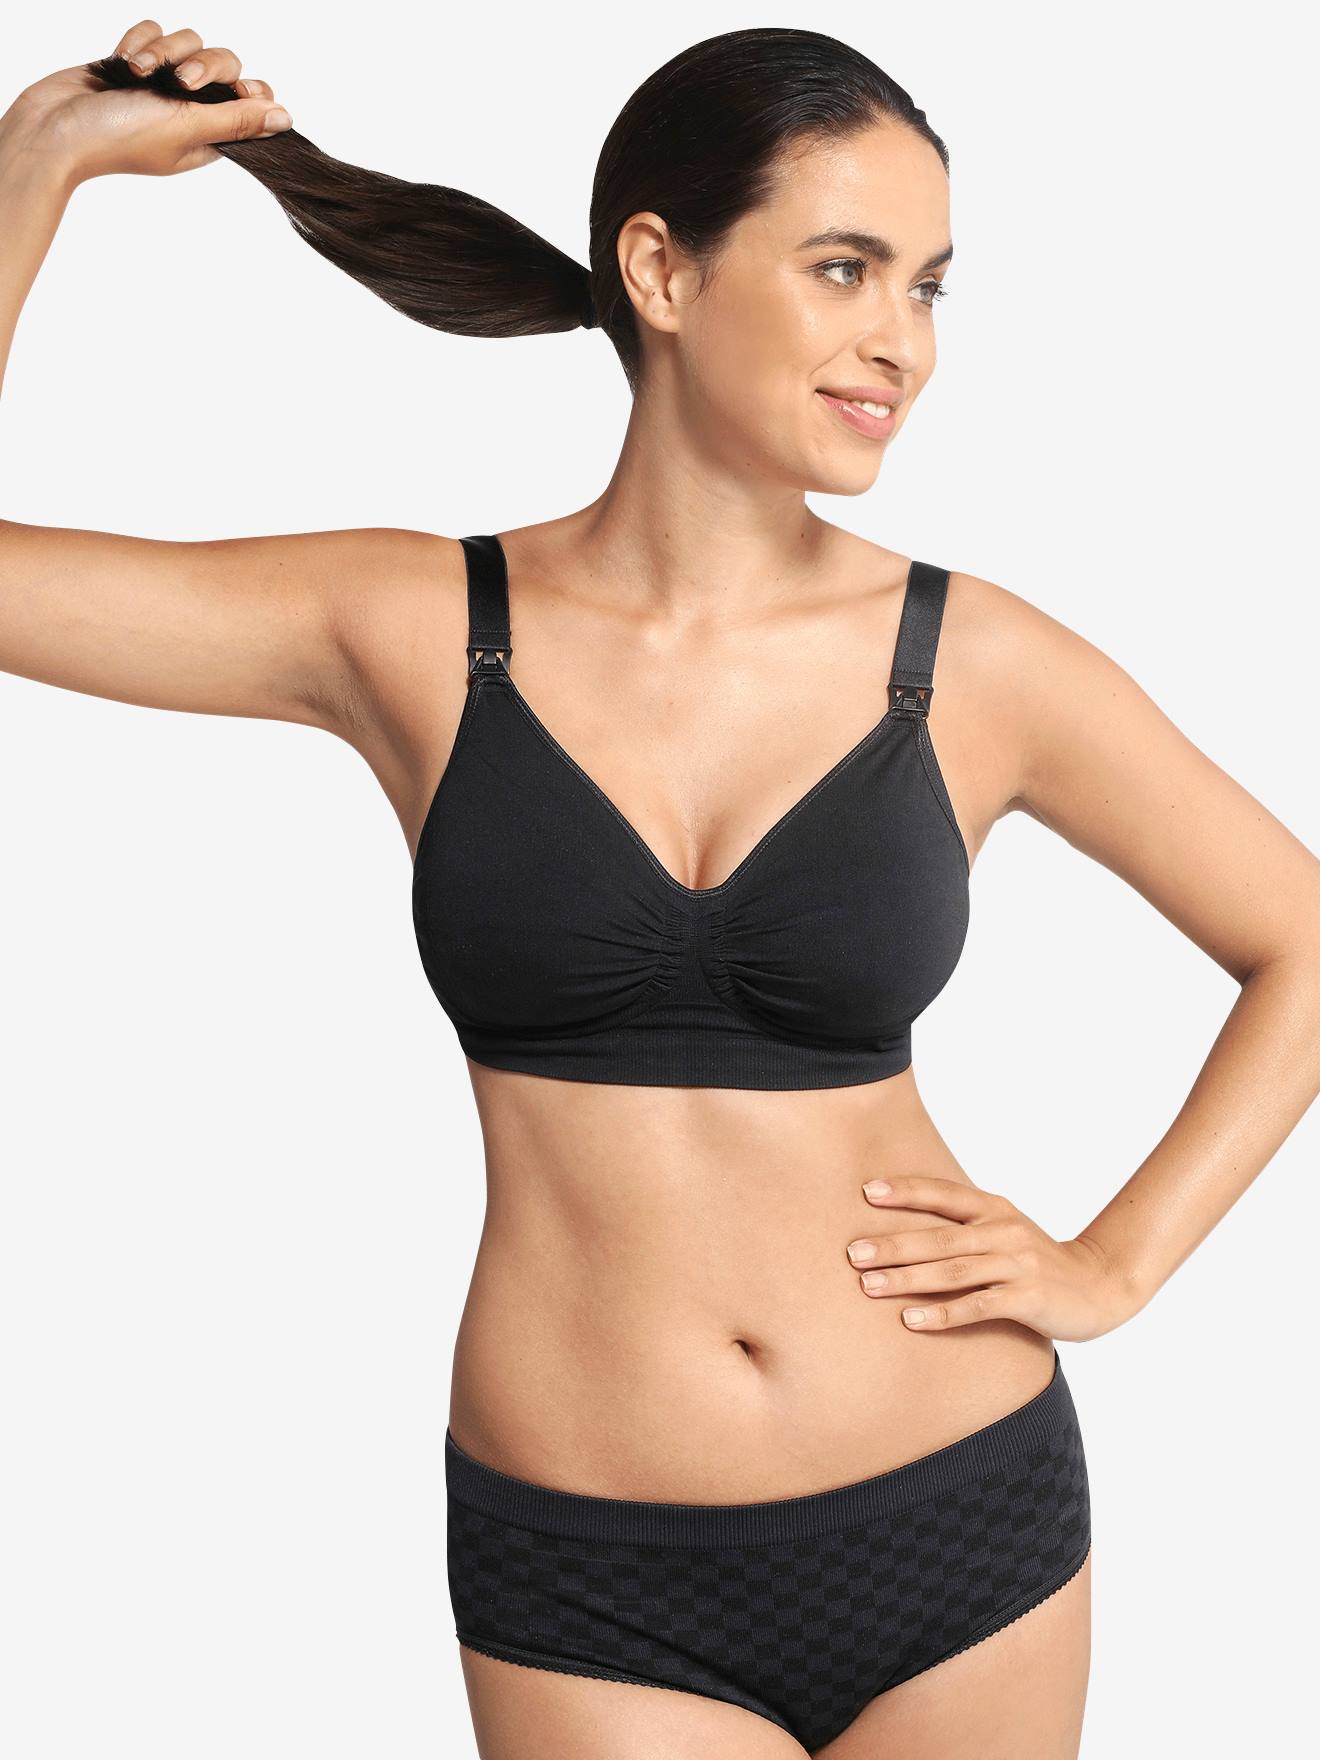 Carriwell Padded GelWire® Support Nursing Bra for Fuller Breasts